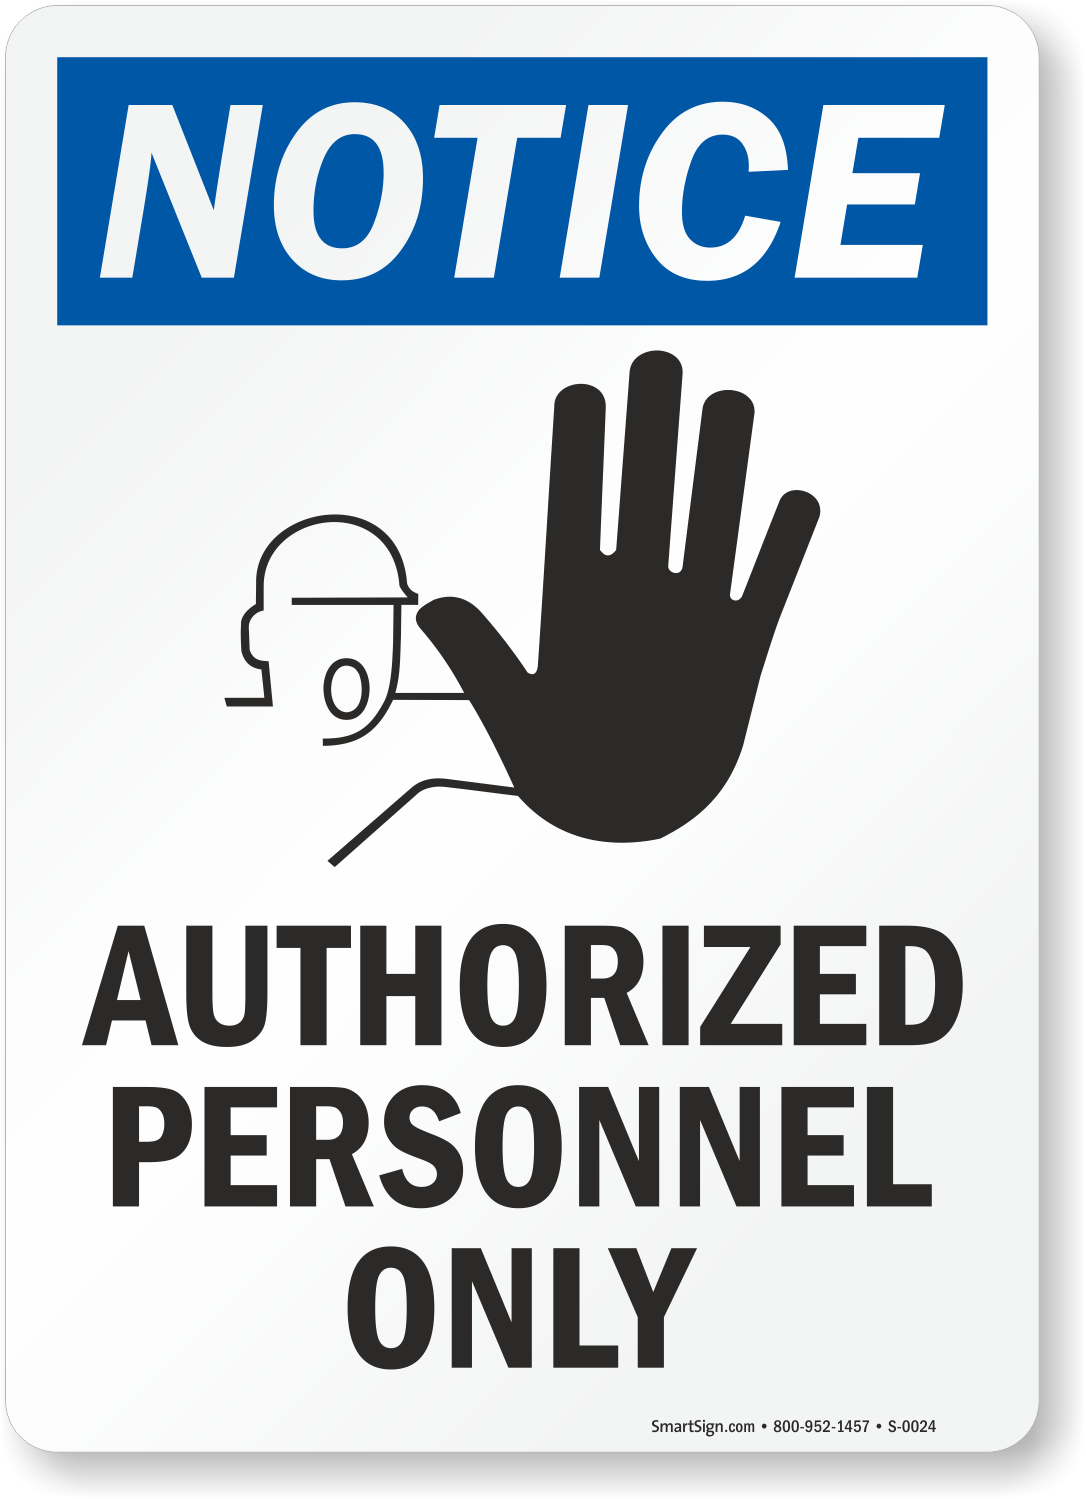 notice-authorized-personnel-only-sign-with-graphic-sku-s-0024